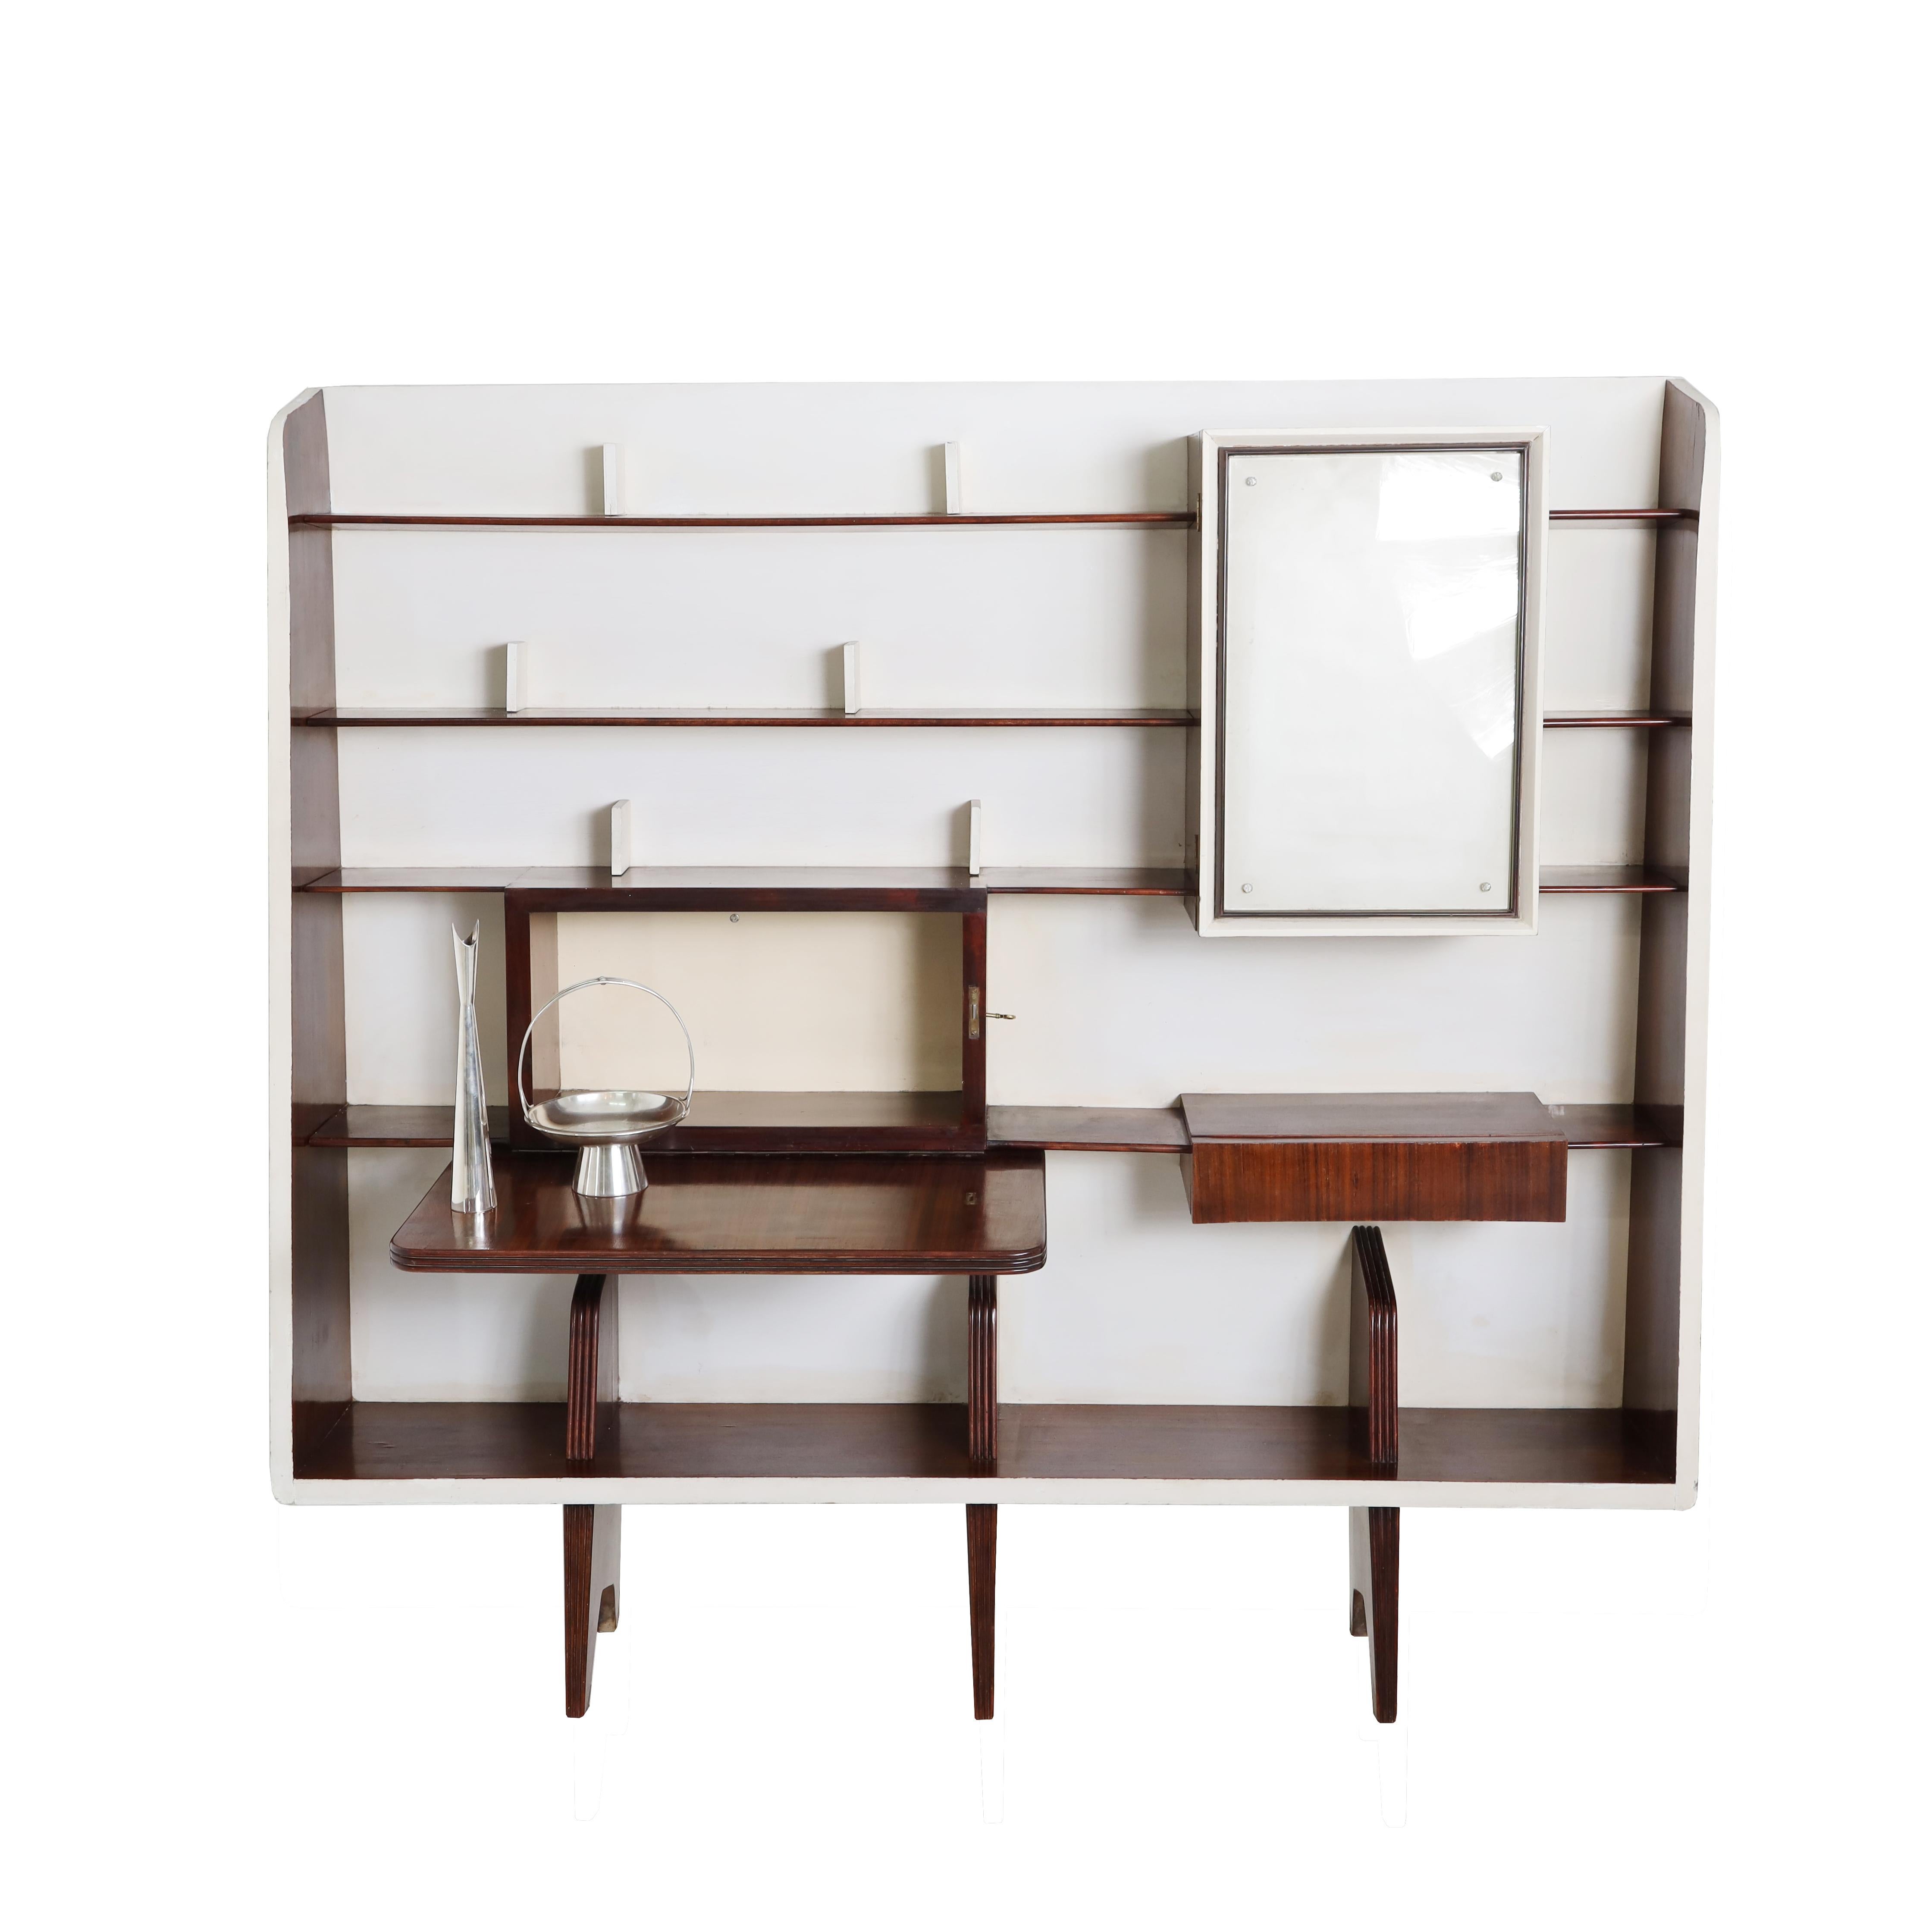 An important rare Gio Ponti Modernist wall unit. Veneered wood, painted wood, mirror glass, brass. Features display shelving, a drop down writing surface and an integrated drinks cabinet with mirrored interior. The wall unit comes with a certificate